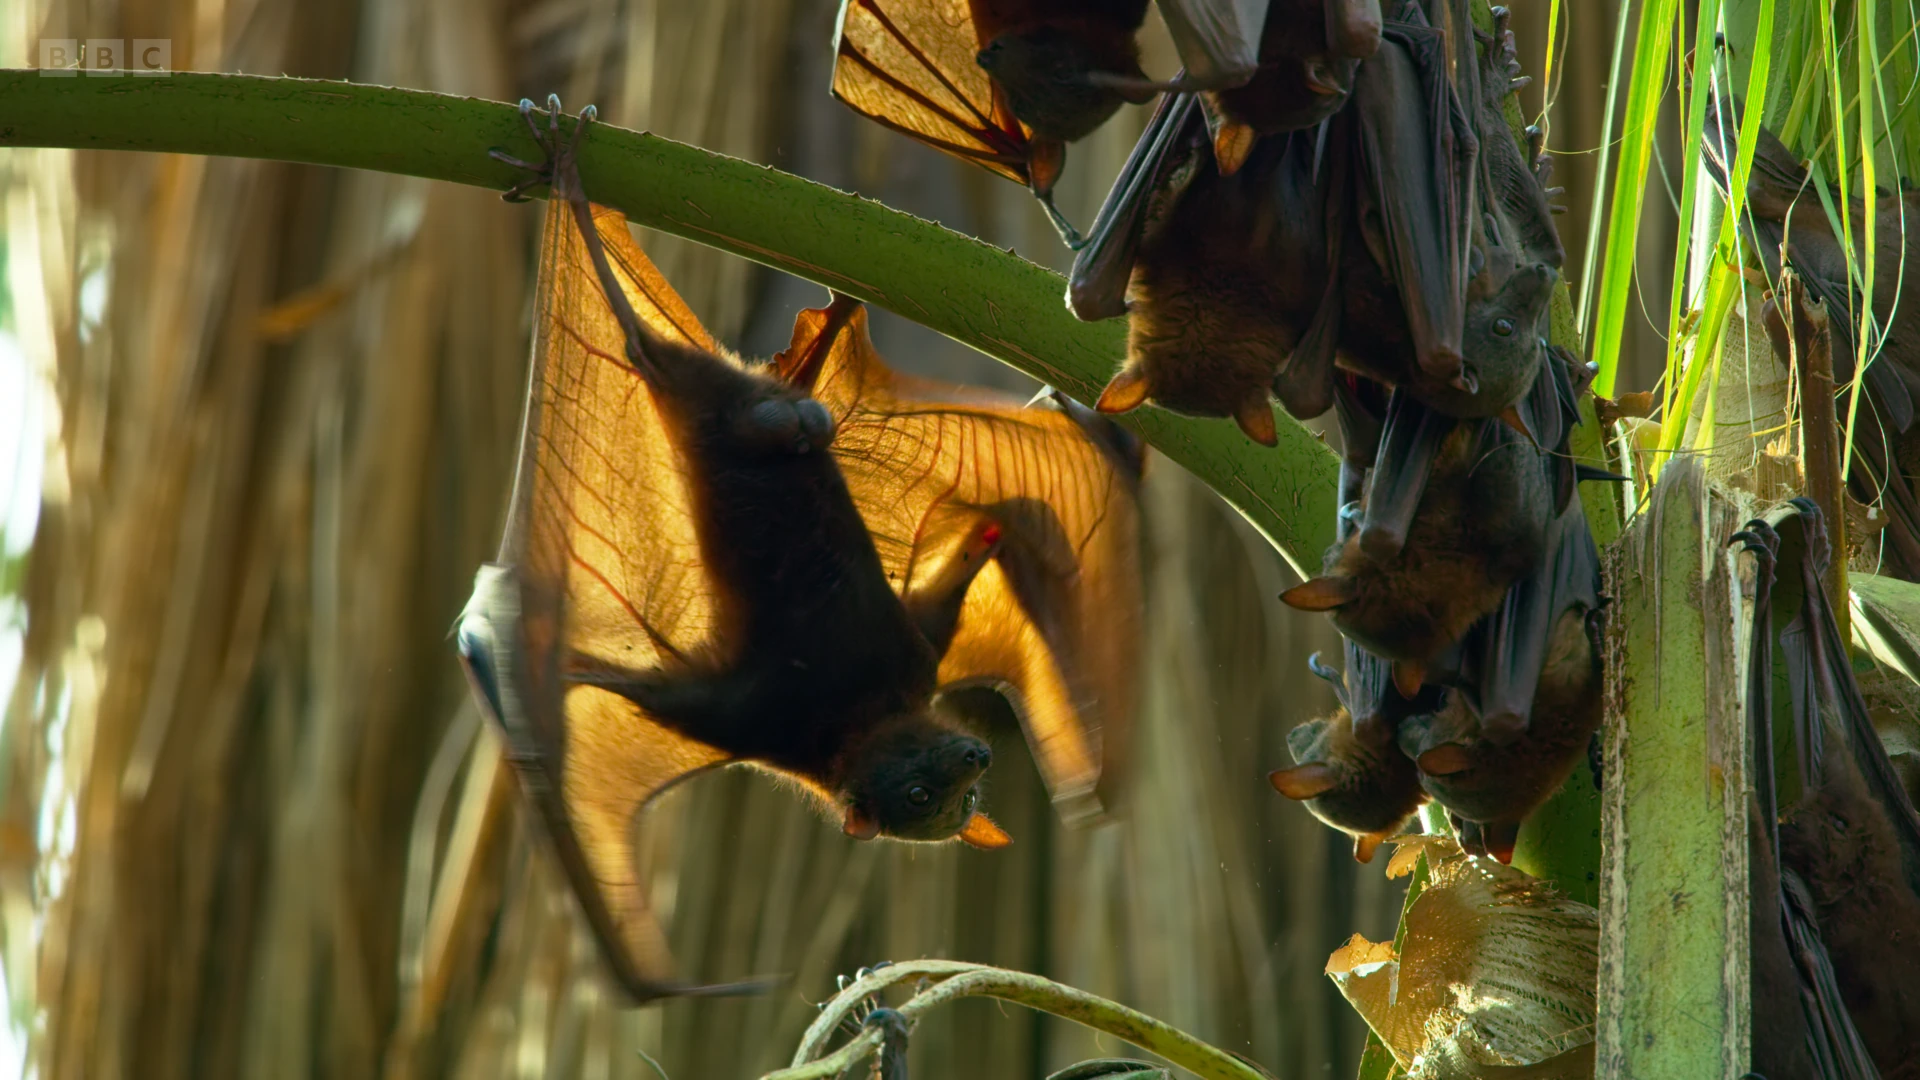 Little red flying fox (Pteropus scapulatus) as shown in Seven Worlds, One Planet - Australia